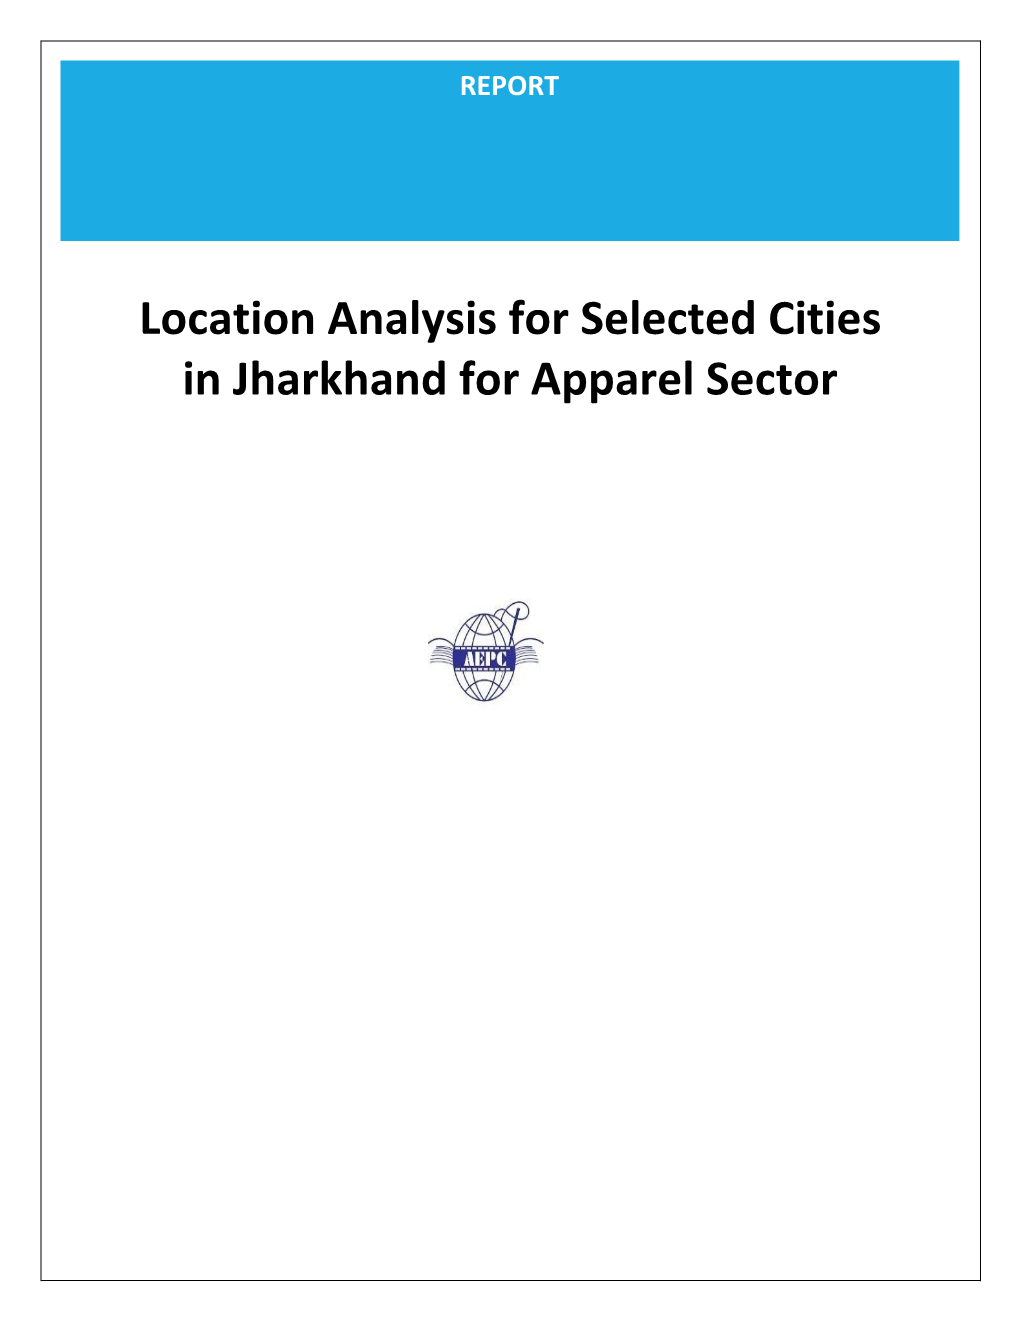 Location Analysis for Selected Cities in Jharkhand for Apparel Sector